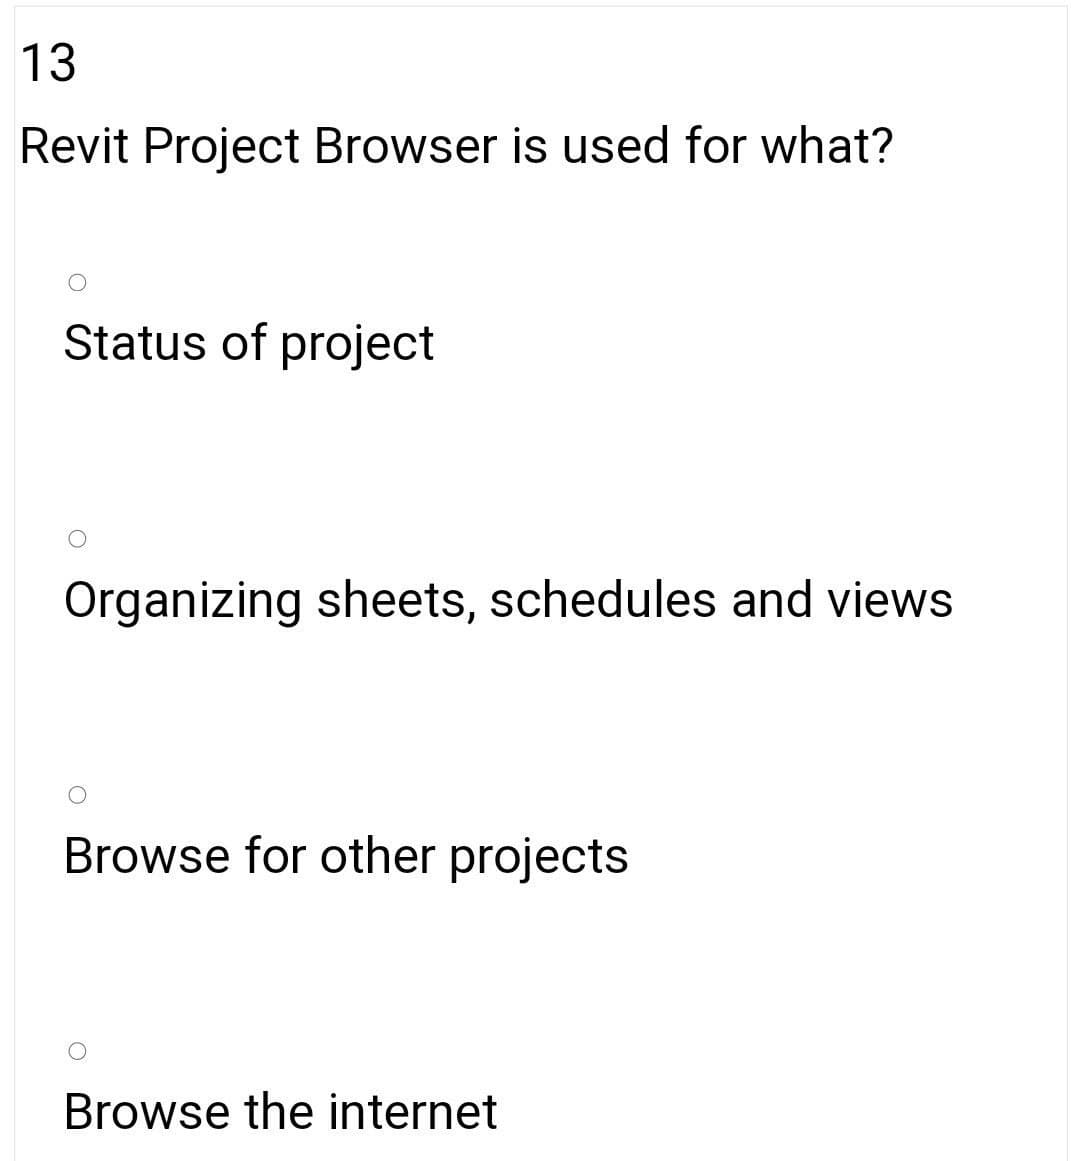 13
Revit Project Browser is used for what?
Status of project
Organizing sheets, schedules and views
Browse for other projects
Browse the internet
